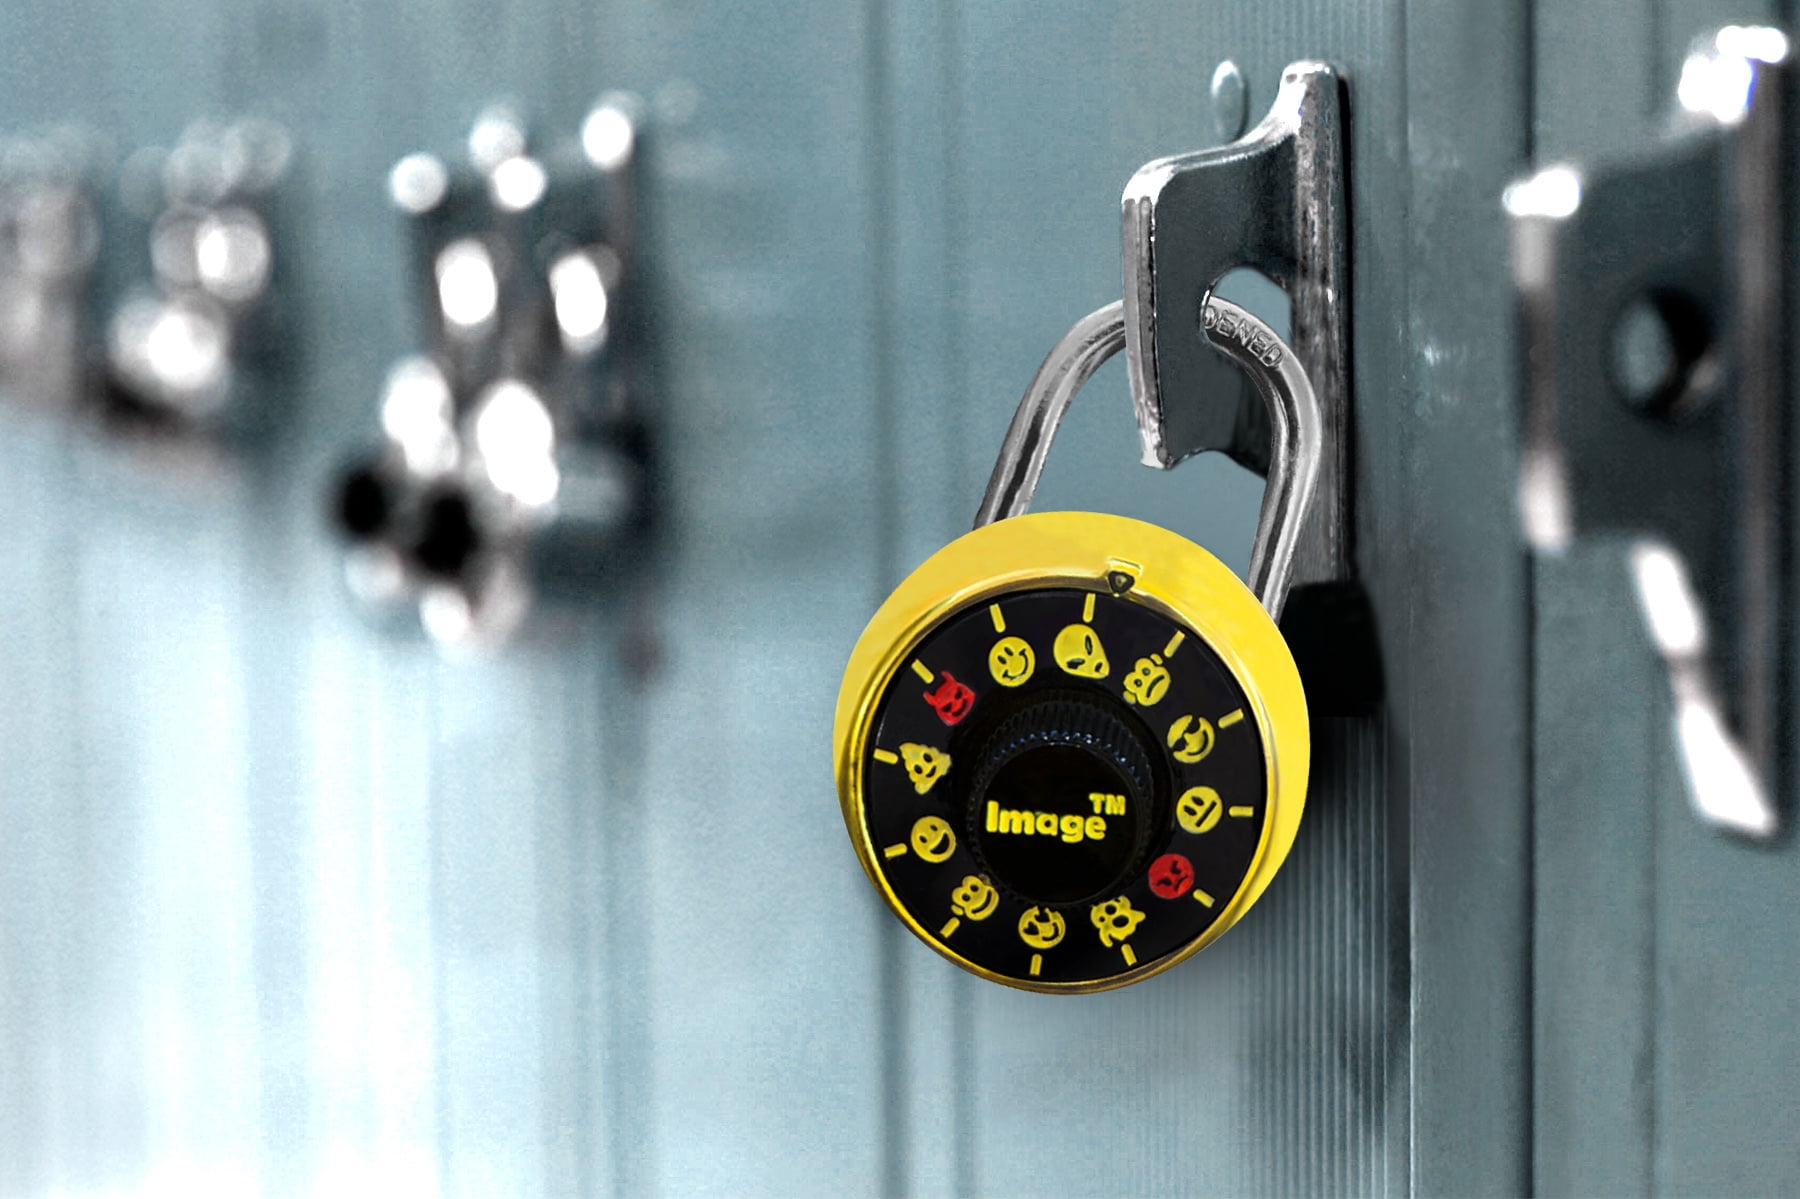 Combination Lock with Fun Emojis, Patented Non-Resettable Combination Lock  for All Types of Lockers Gym, School, Storage Facilities (With  Administrative Key) 